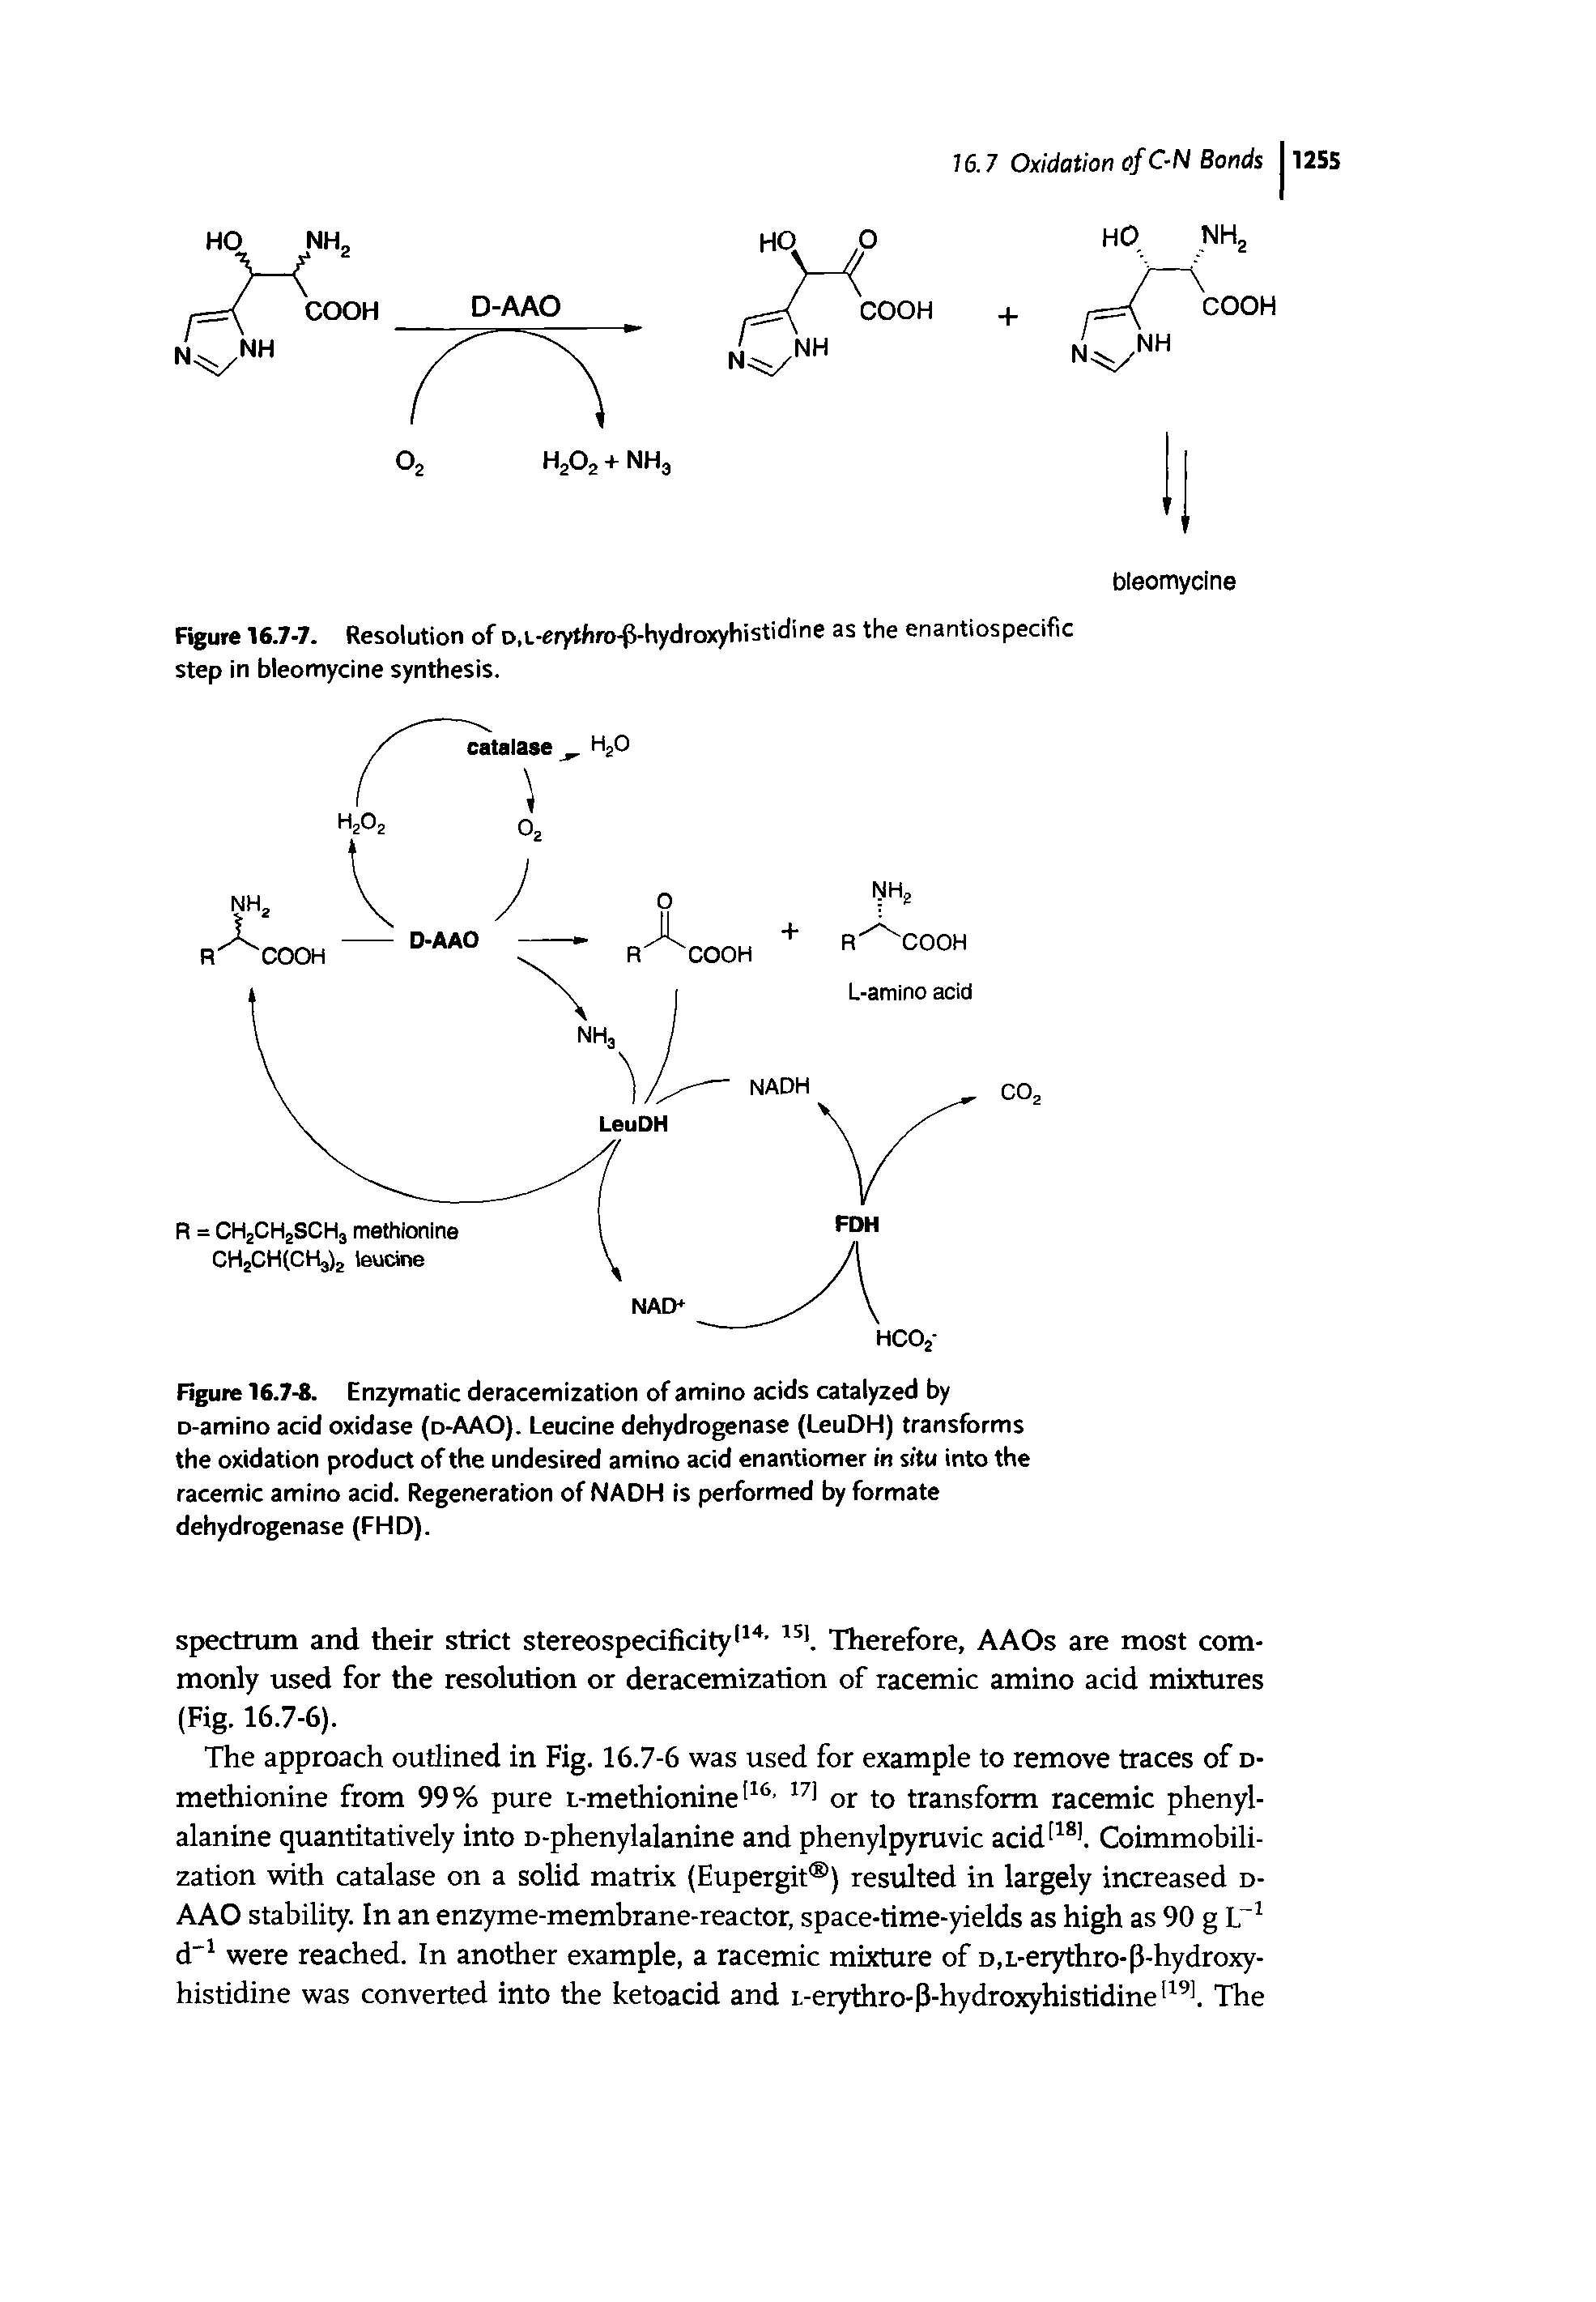 Figure 16.7-7. Resolution of D,L-erythro-(vhydroxyhistidi ne as the enantiospecific step in bleomycine synthesis.